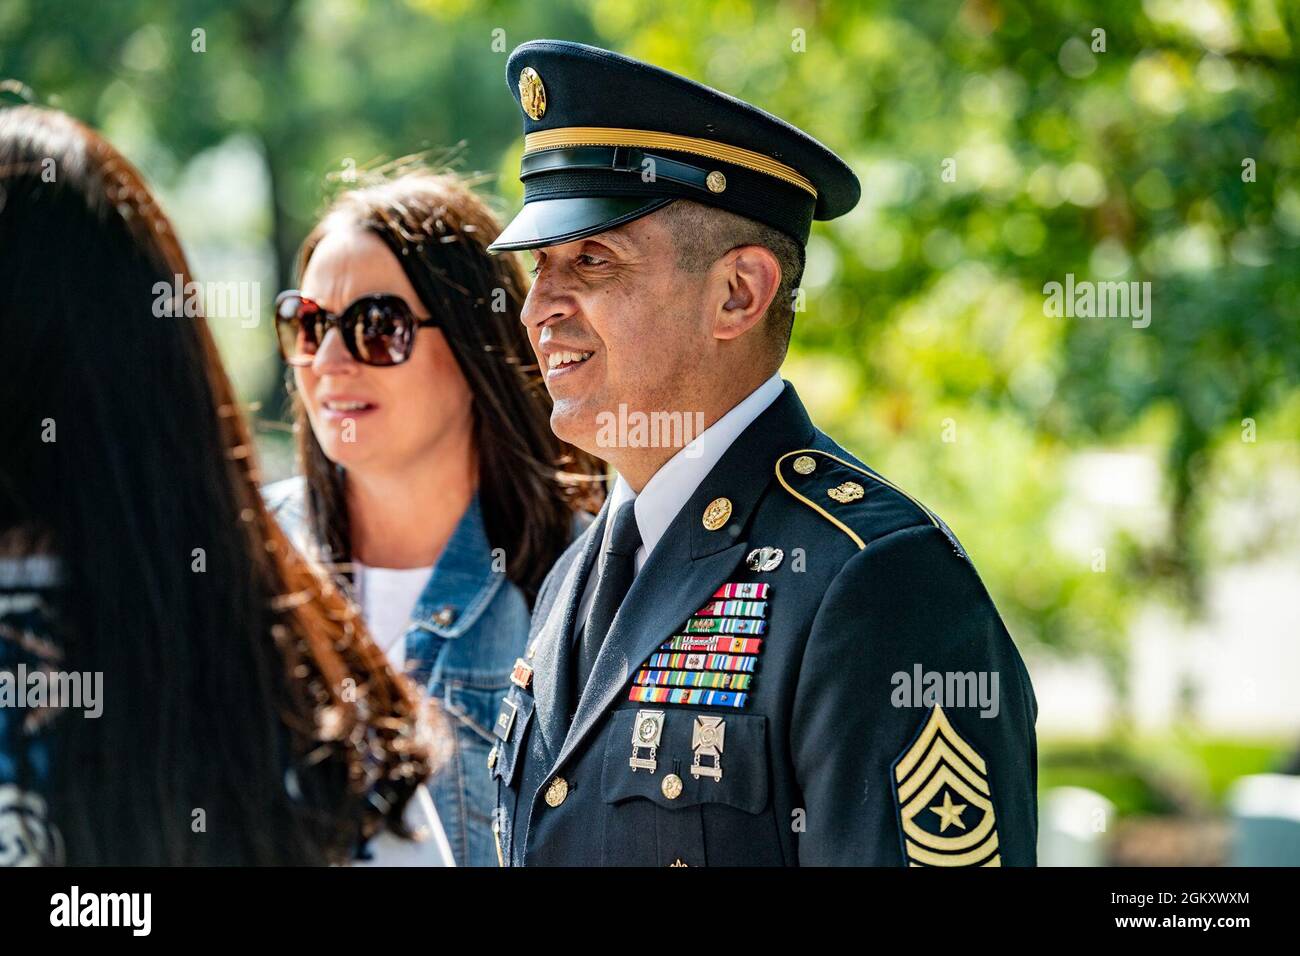 .S. Army Sgt. Maj. Ralph Martinez, 9th regimental sergeant major, U.S. Army Chaplain Corps attends a ceremony in honor of the 246th Chaplain Corps Anniversary at Chaplain's Hill in Section 2 of Arlington National Cemetery, Arlington, Virginia, July 22, 2021. Stock Photo